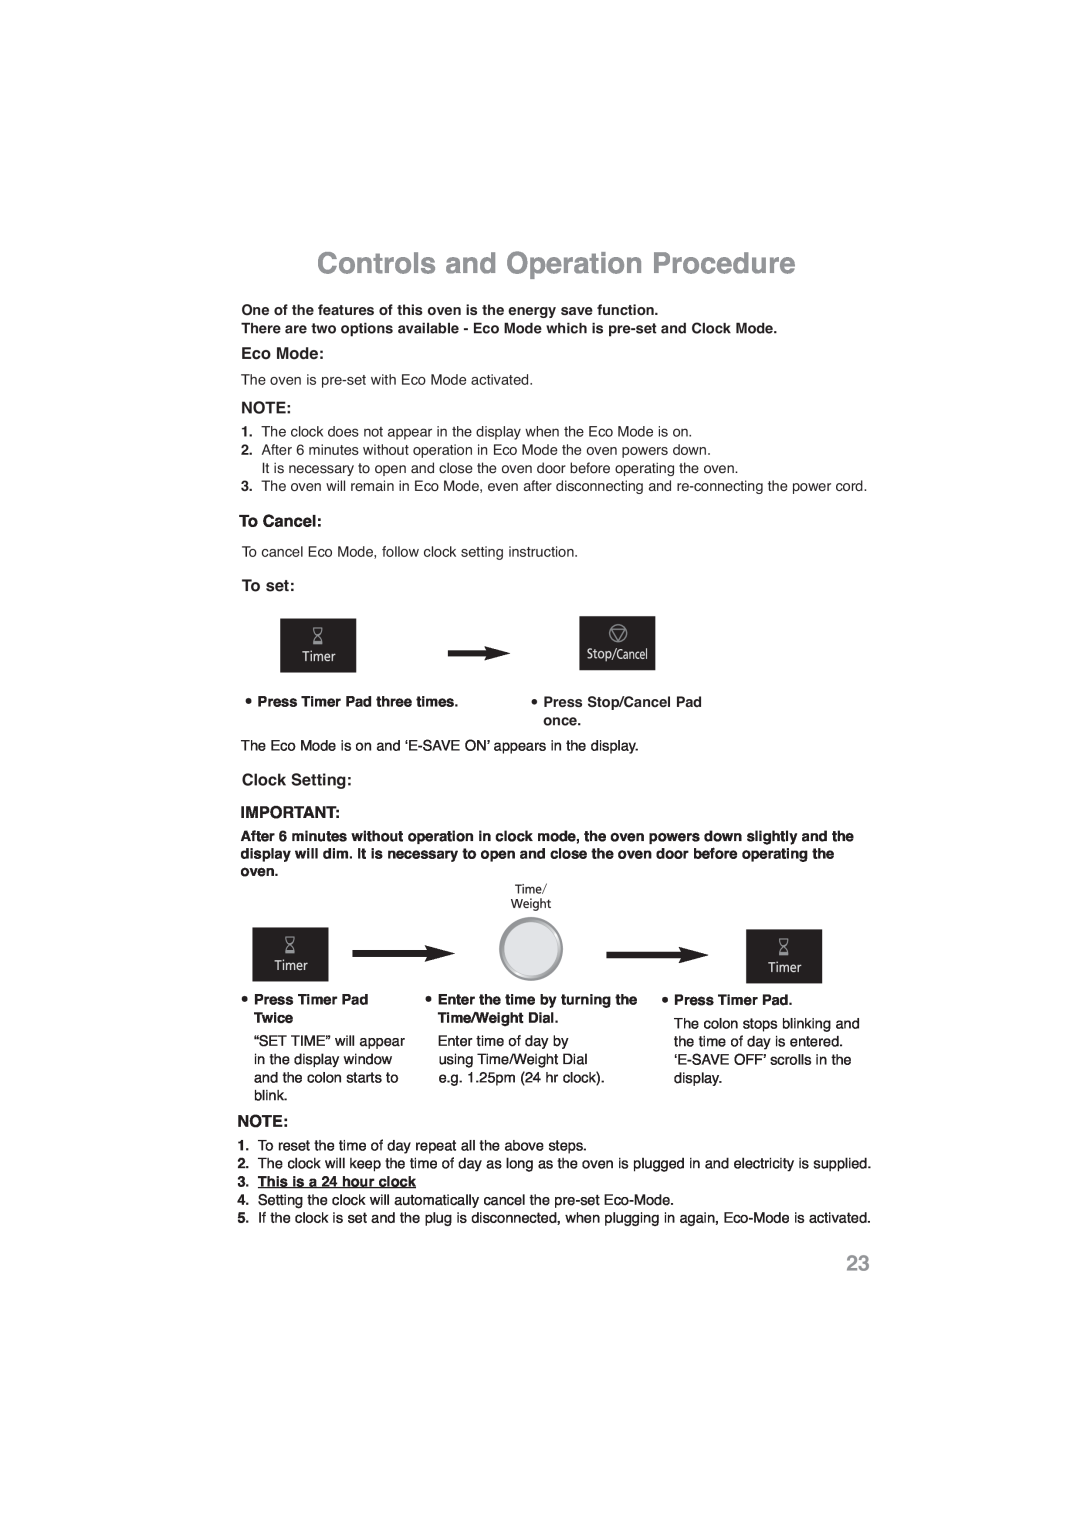 Panasonic NN-CF778S Controls and Operation Procedure, Eco Mode, To Cancel, To set, Clock Setting, once, •Press Timer Pad 